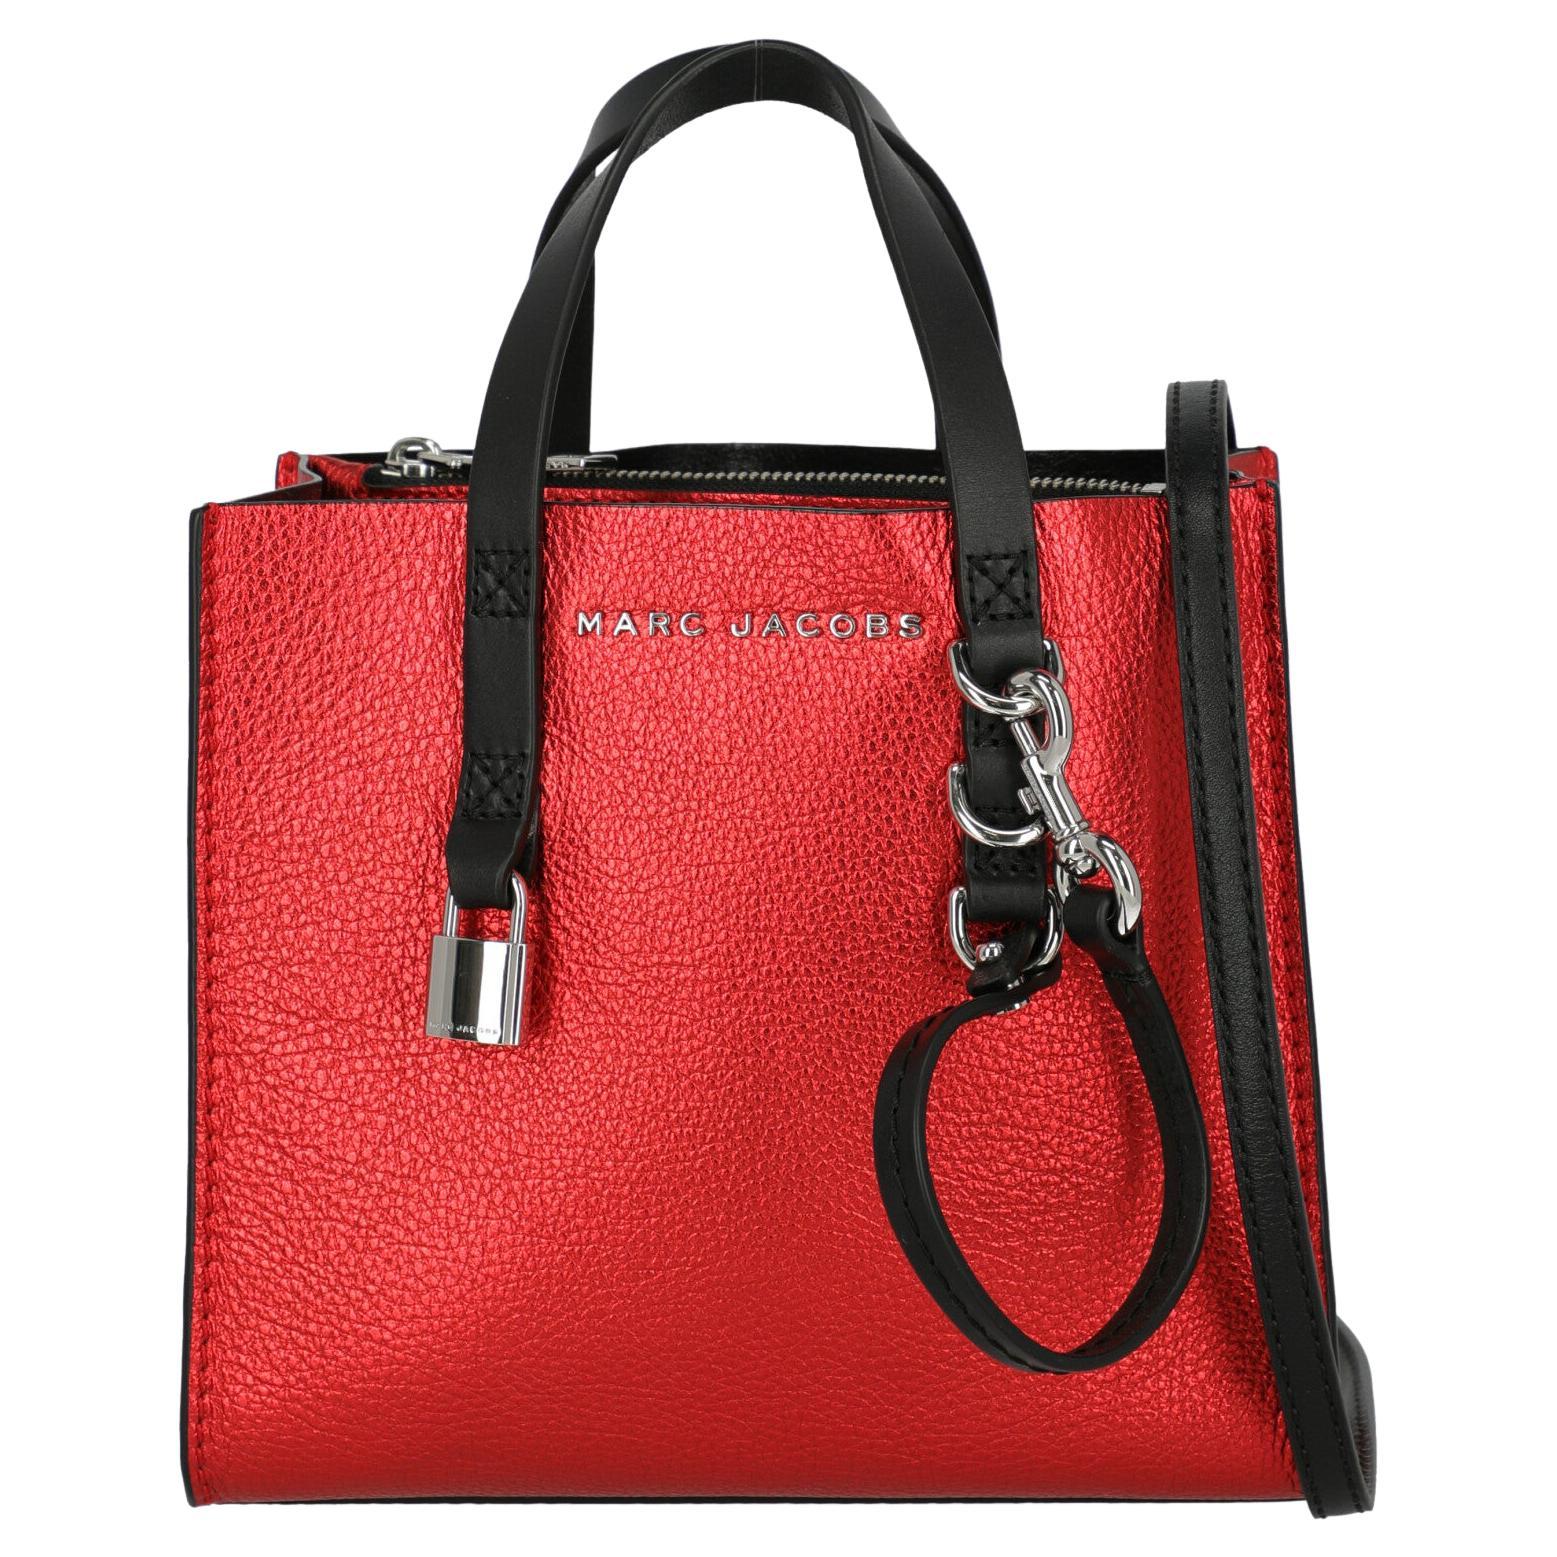 Chanel Vintage Red Leather Tote - Mj Wilson Photography